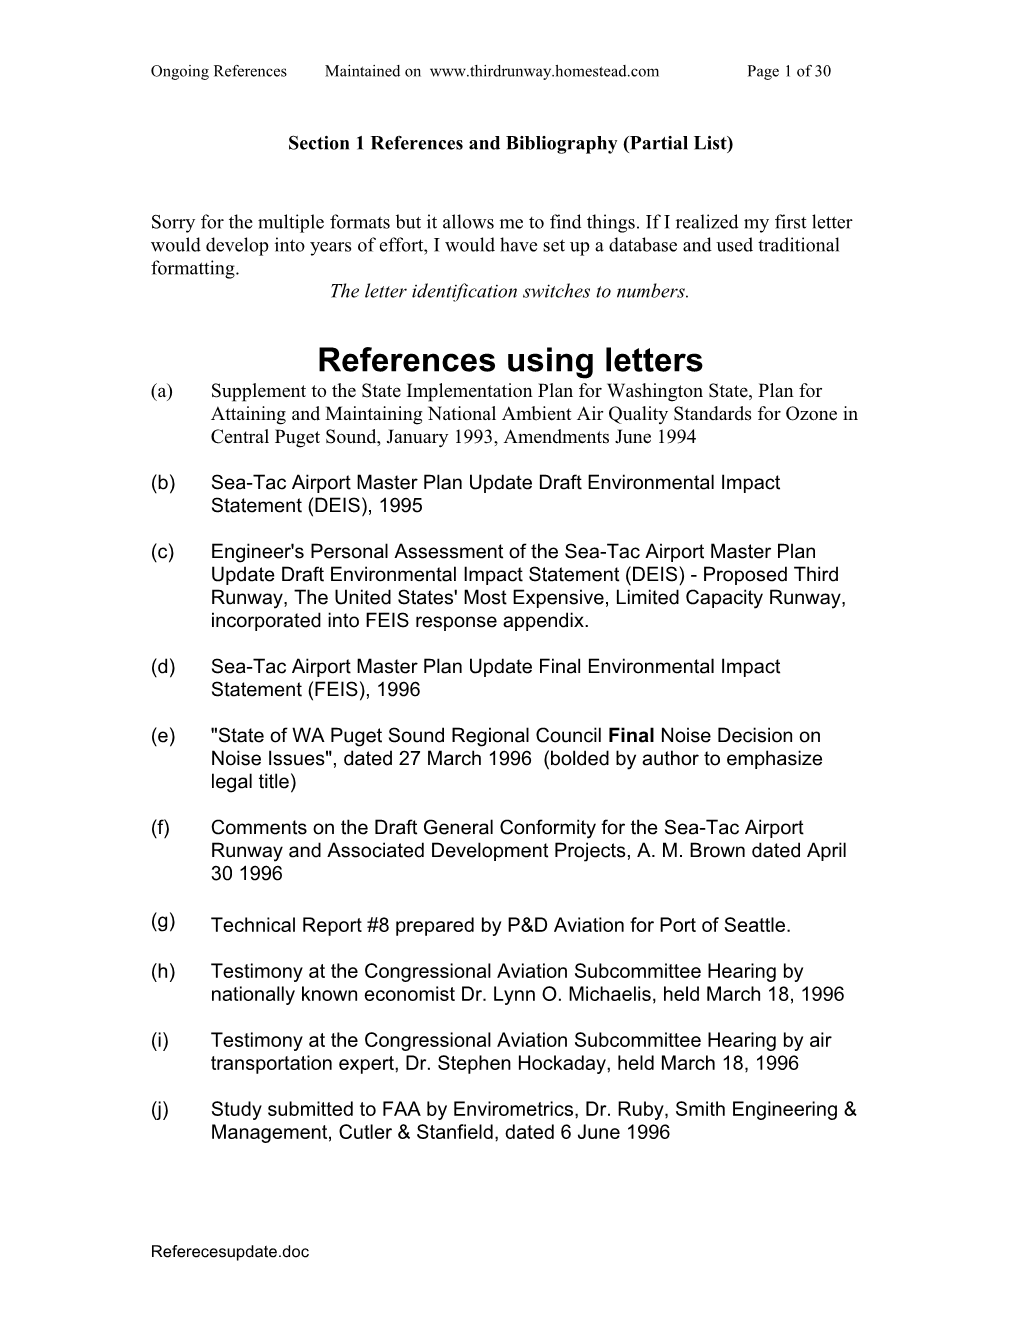 Section 1 References and Bibliography (Partial List)